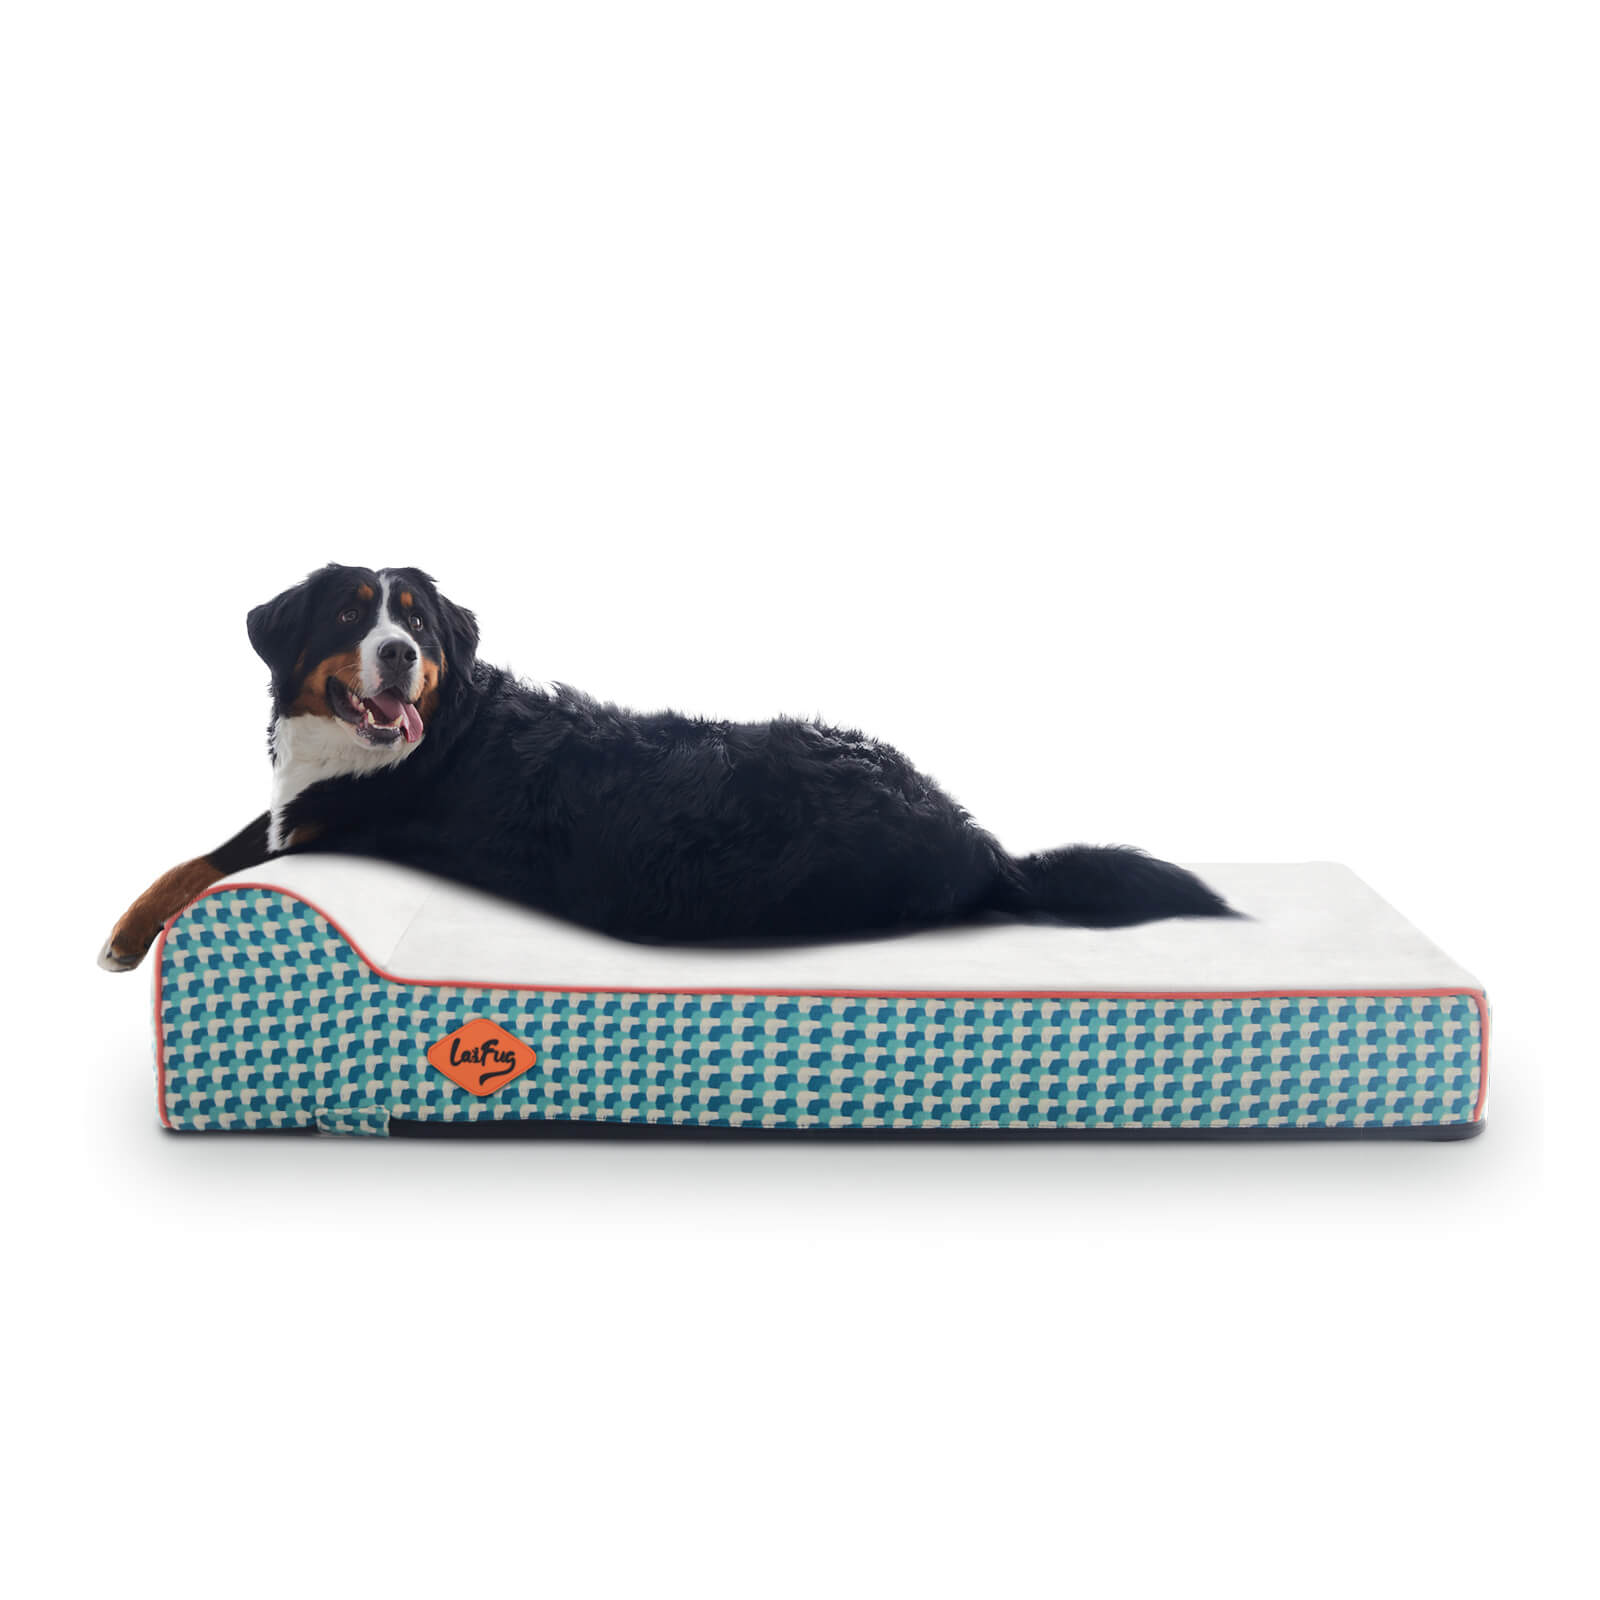 Laifug Single Pillow Dog Bed - memory foam dog bed 46"*28"*8" / Green And White Plaid